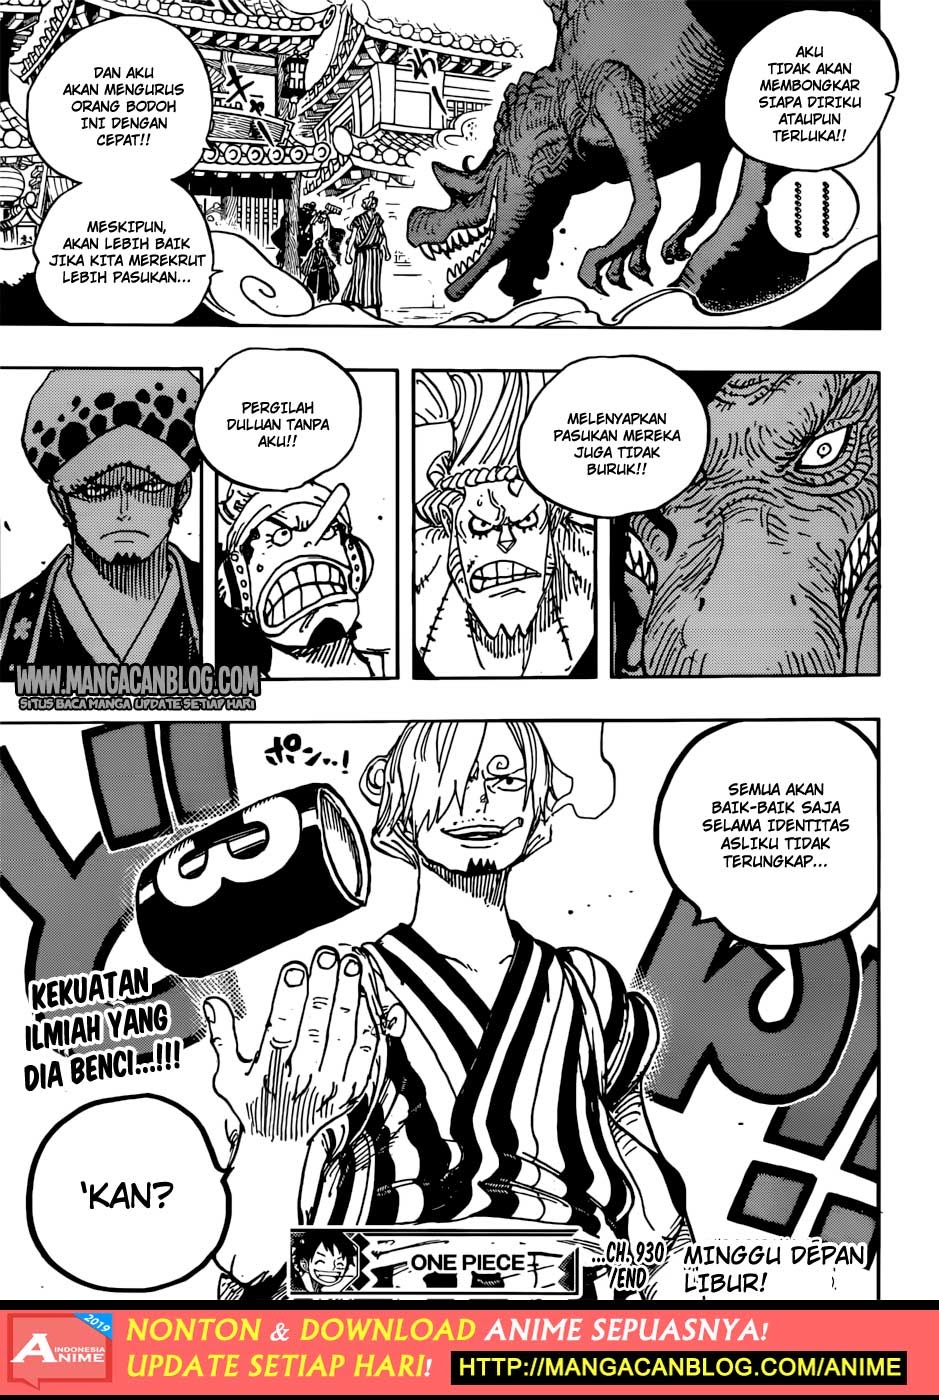 One Piece Chapter 930 Indo - 119